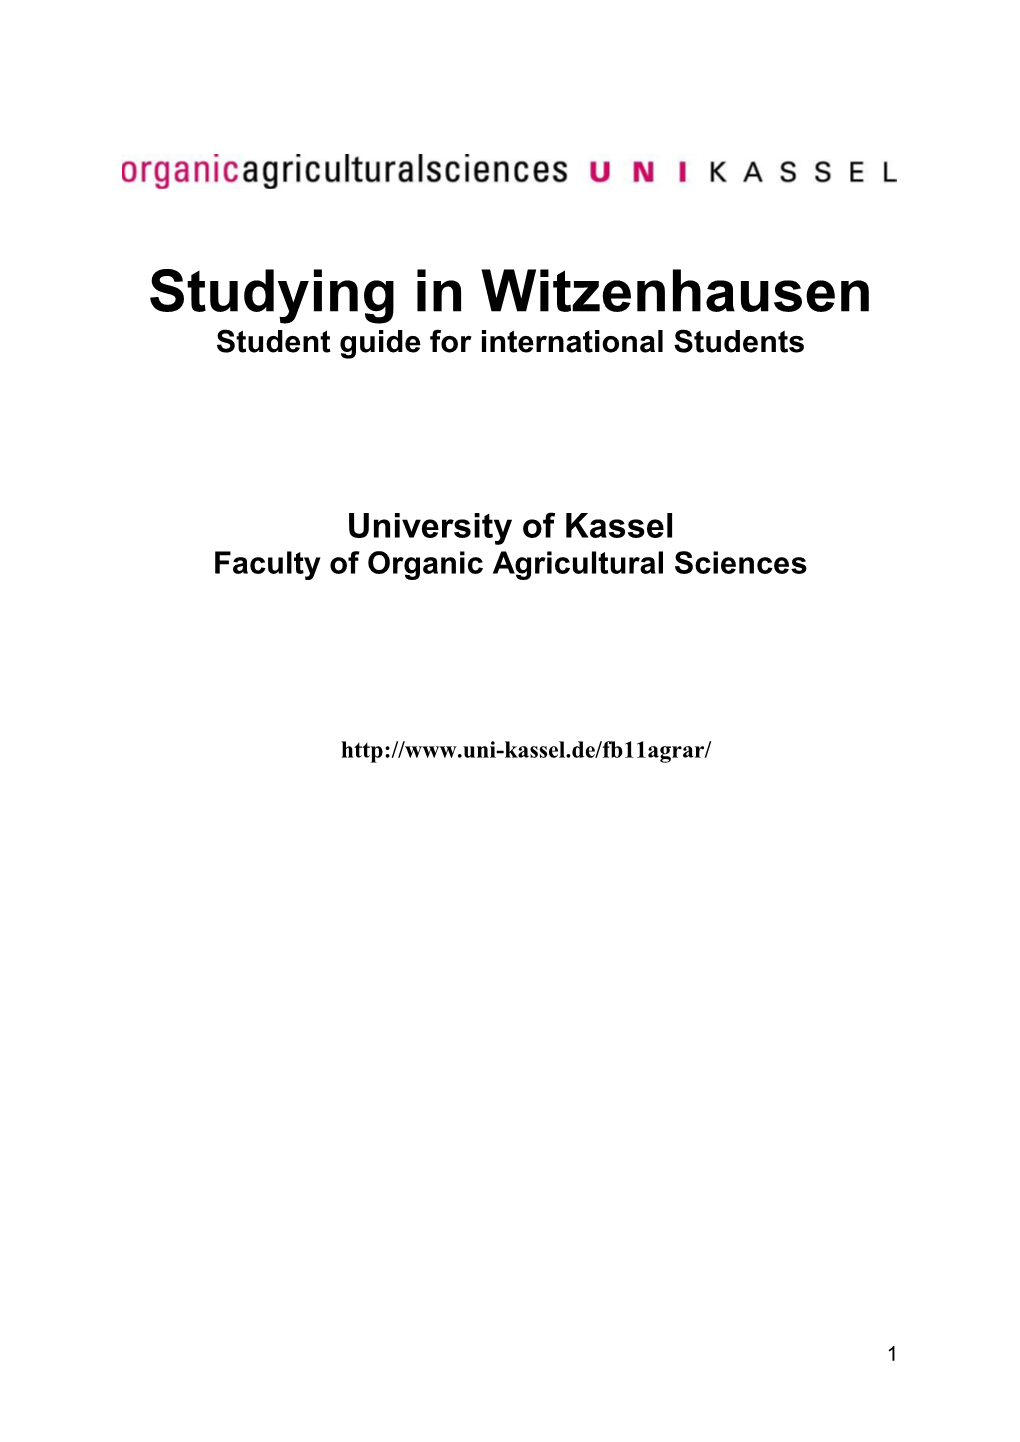 Studying in Witzenhausen Student Guide for International Students